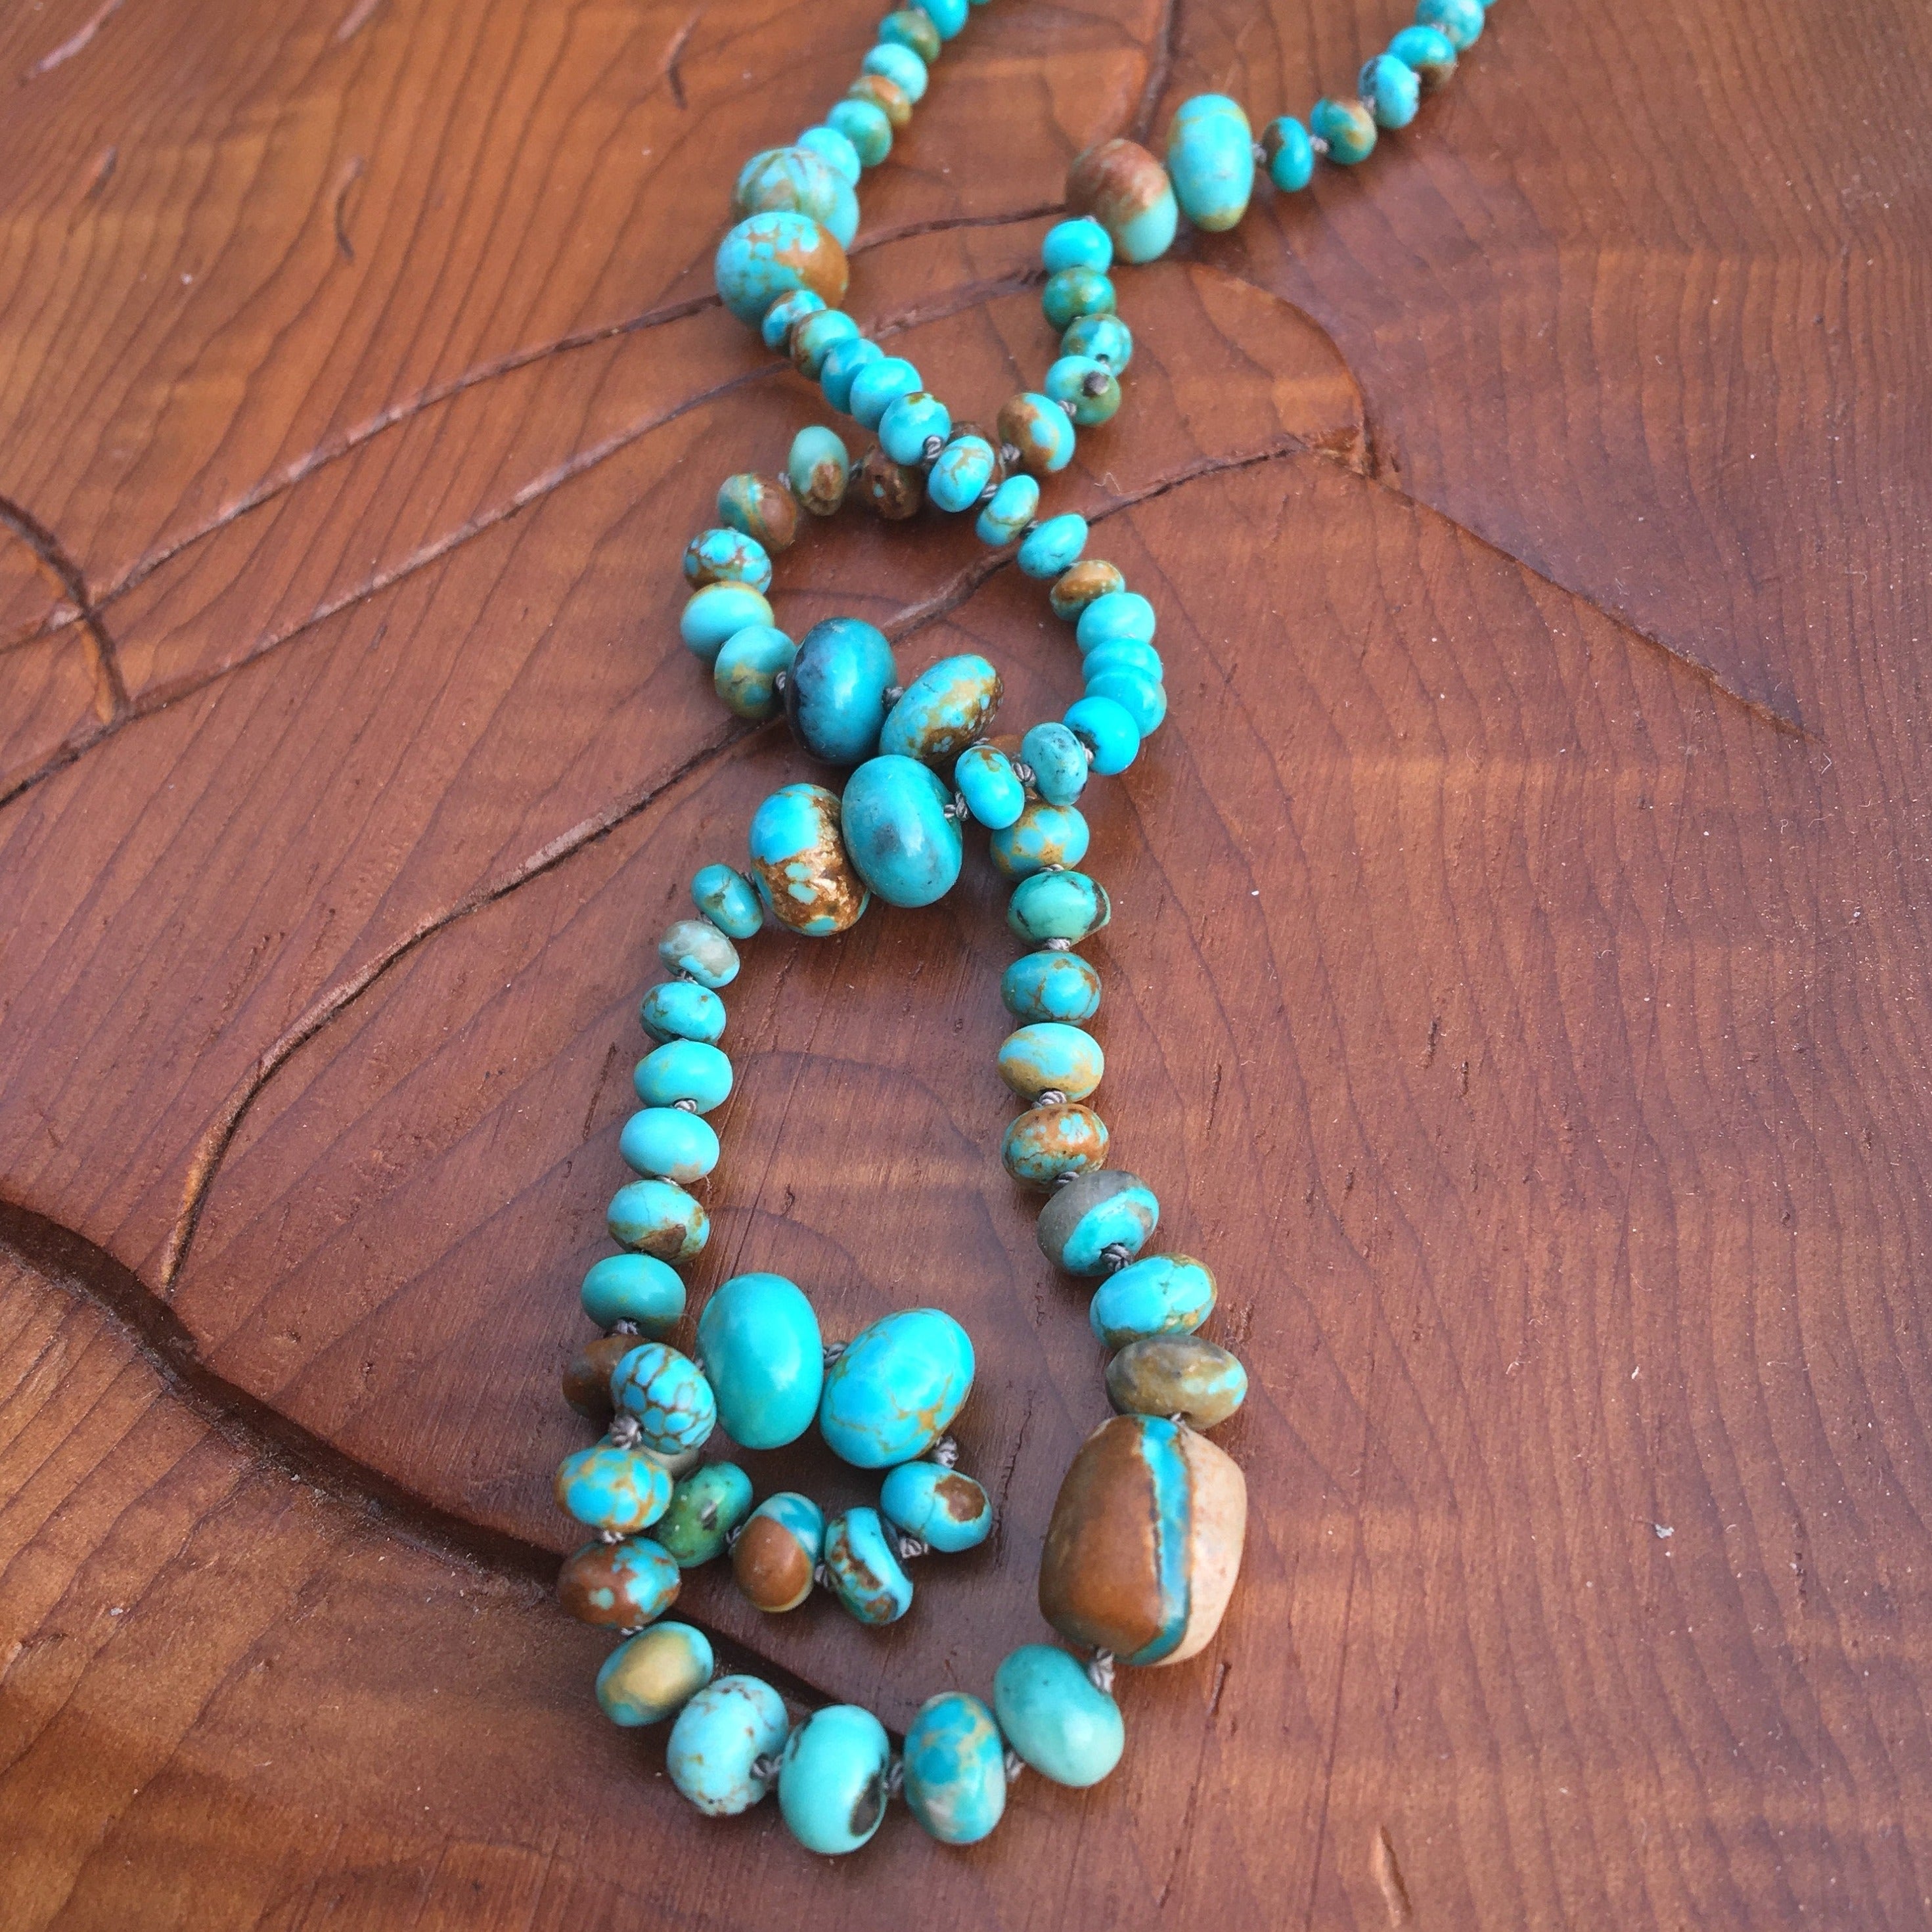 McGinnis Turquoise Beaded Necklace